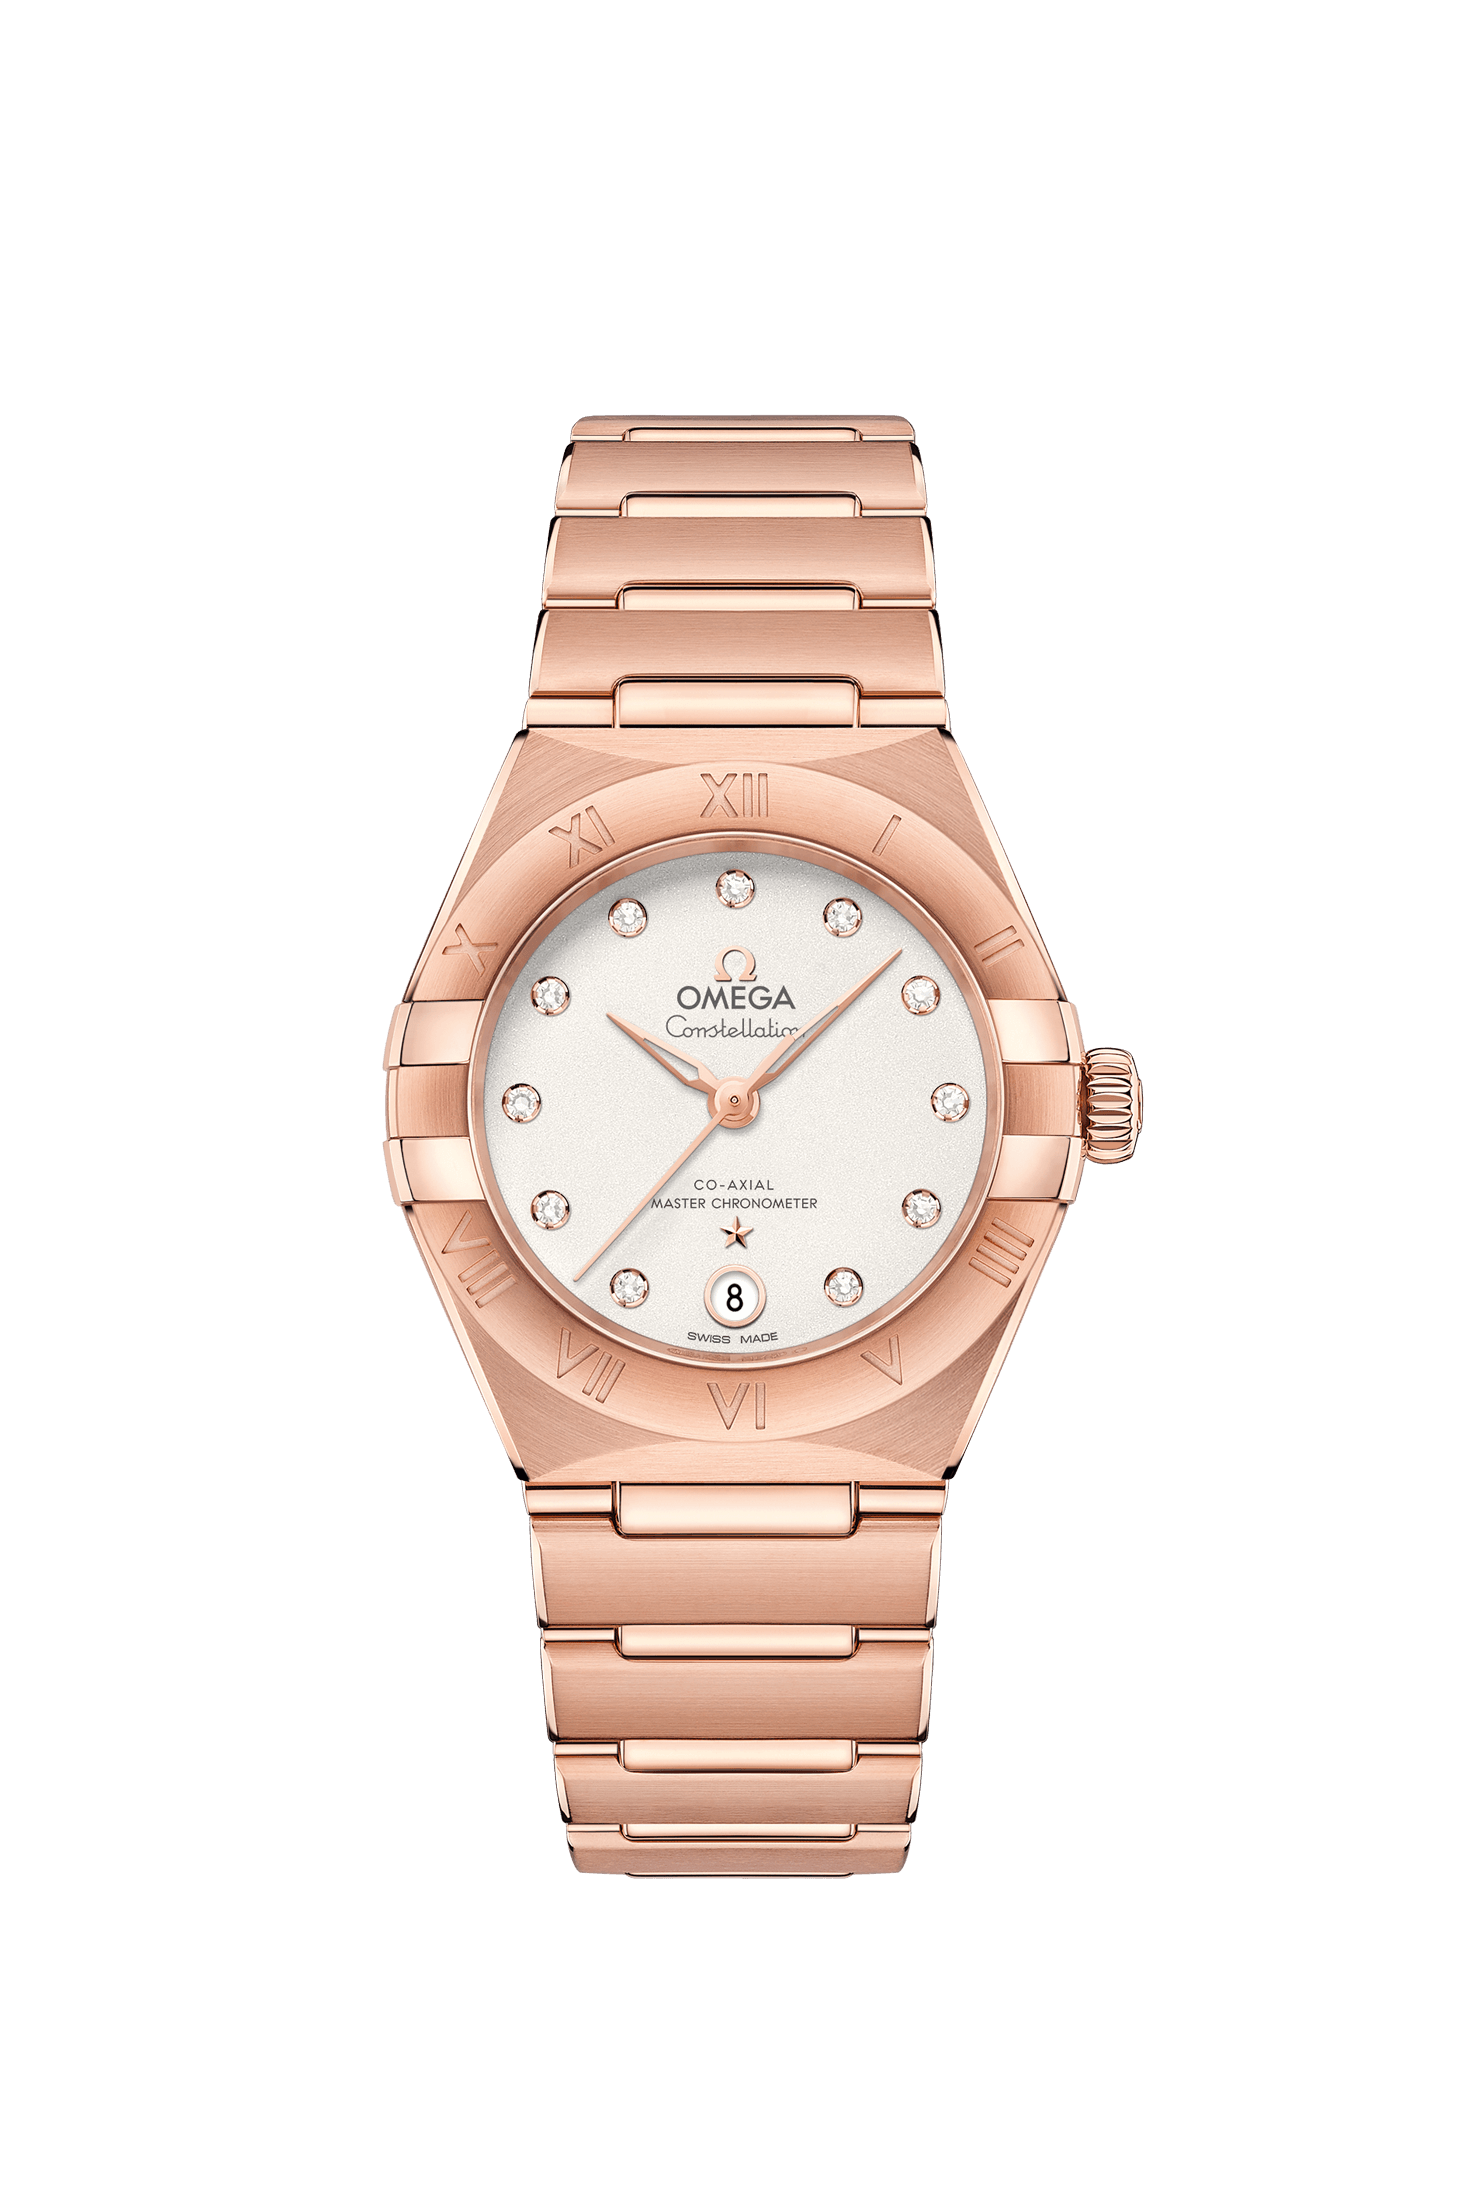 Ladies' watch  OMEGA, Constellation Co Axial Master Chronometer / 29mm, SKU: 131.50.29.20.52.001 | watchphilosophy.co.uk